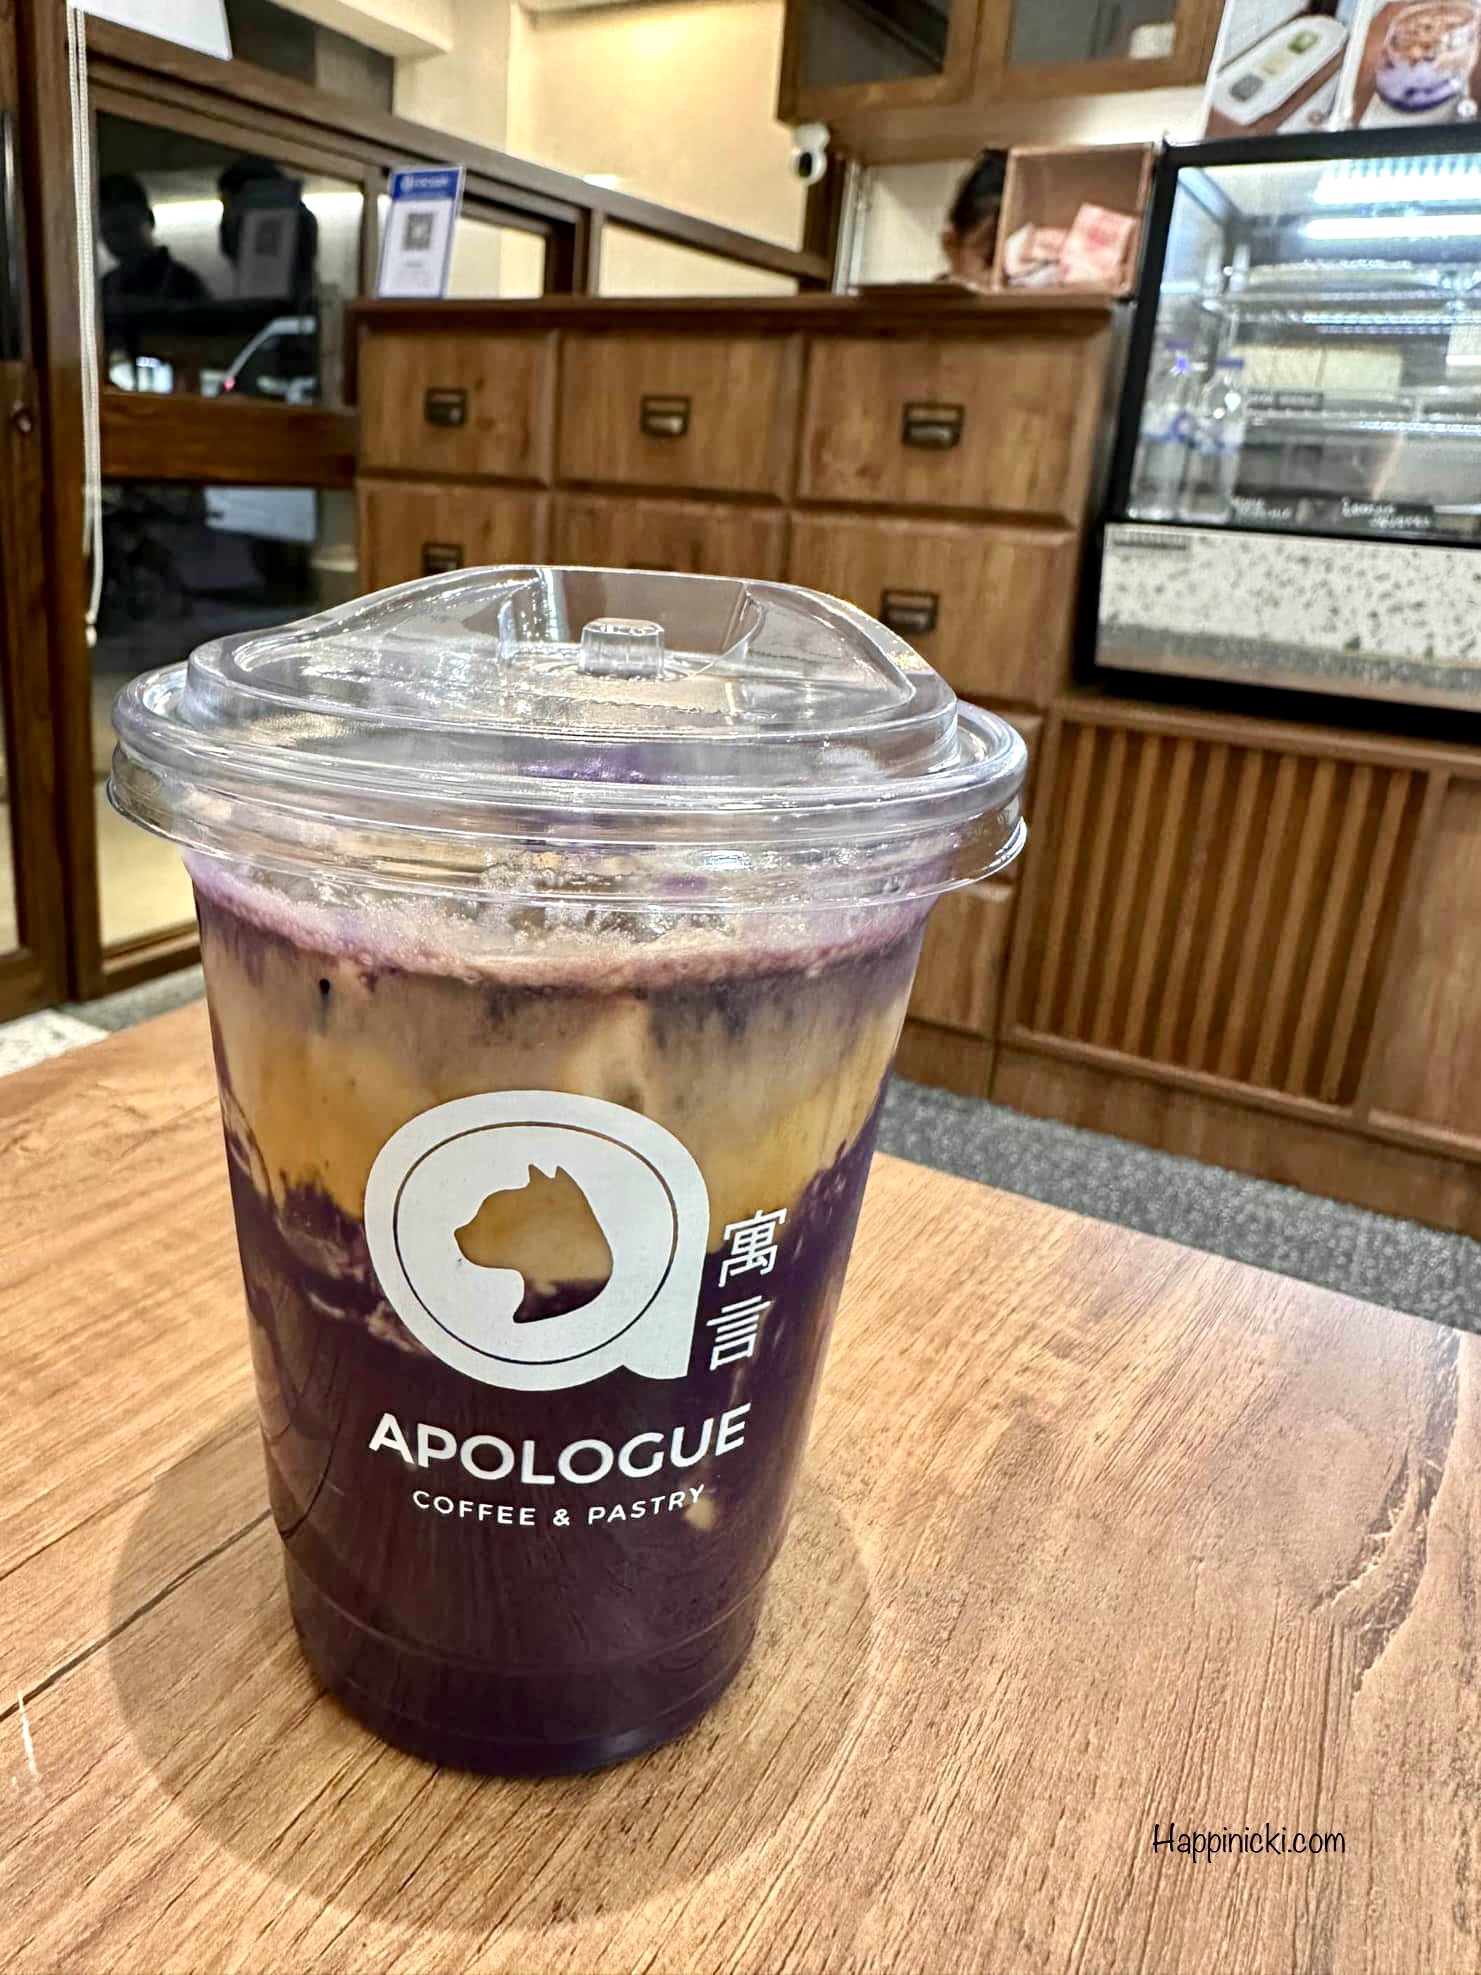 See an Unconventional Cafe When You Visit Apologue Coffee & Pastry